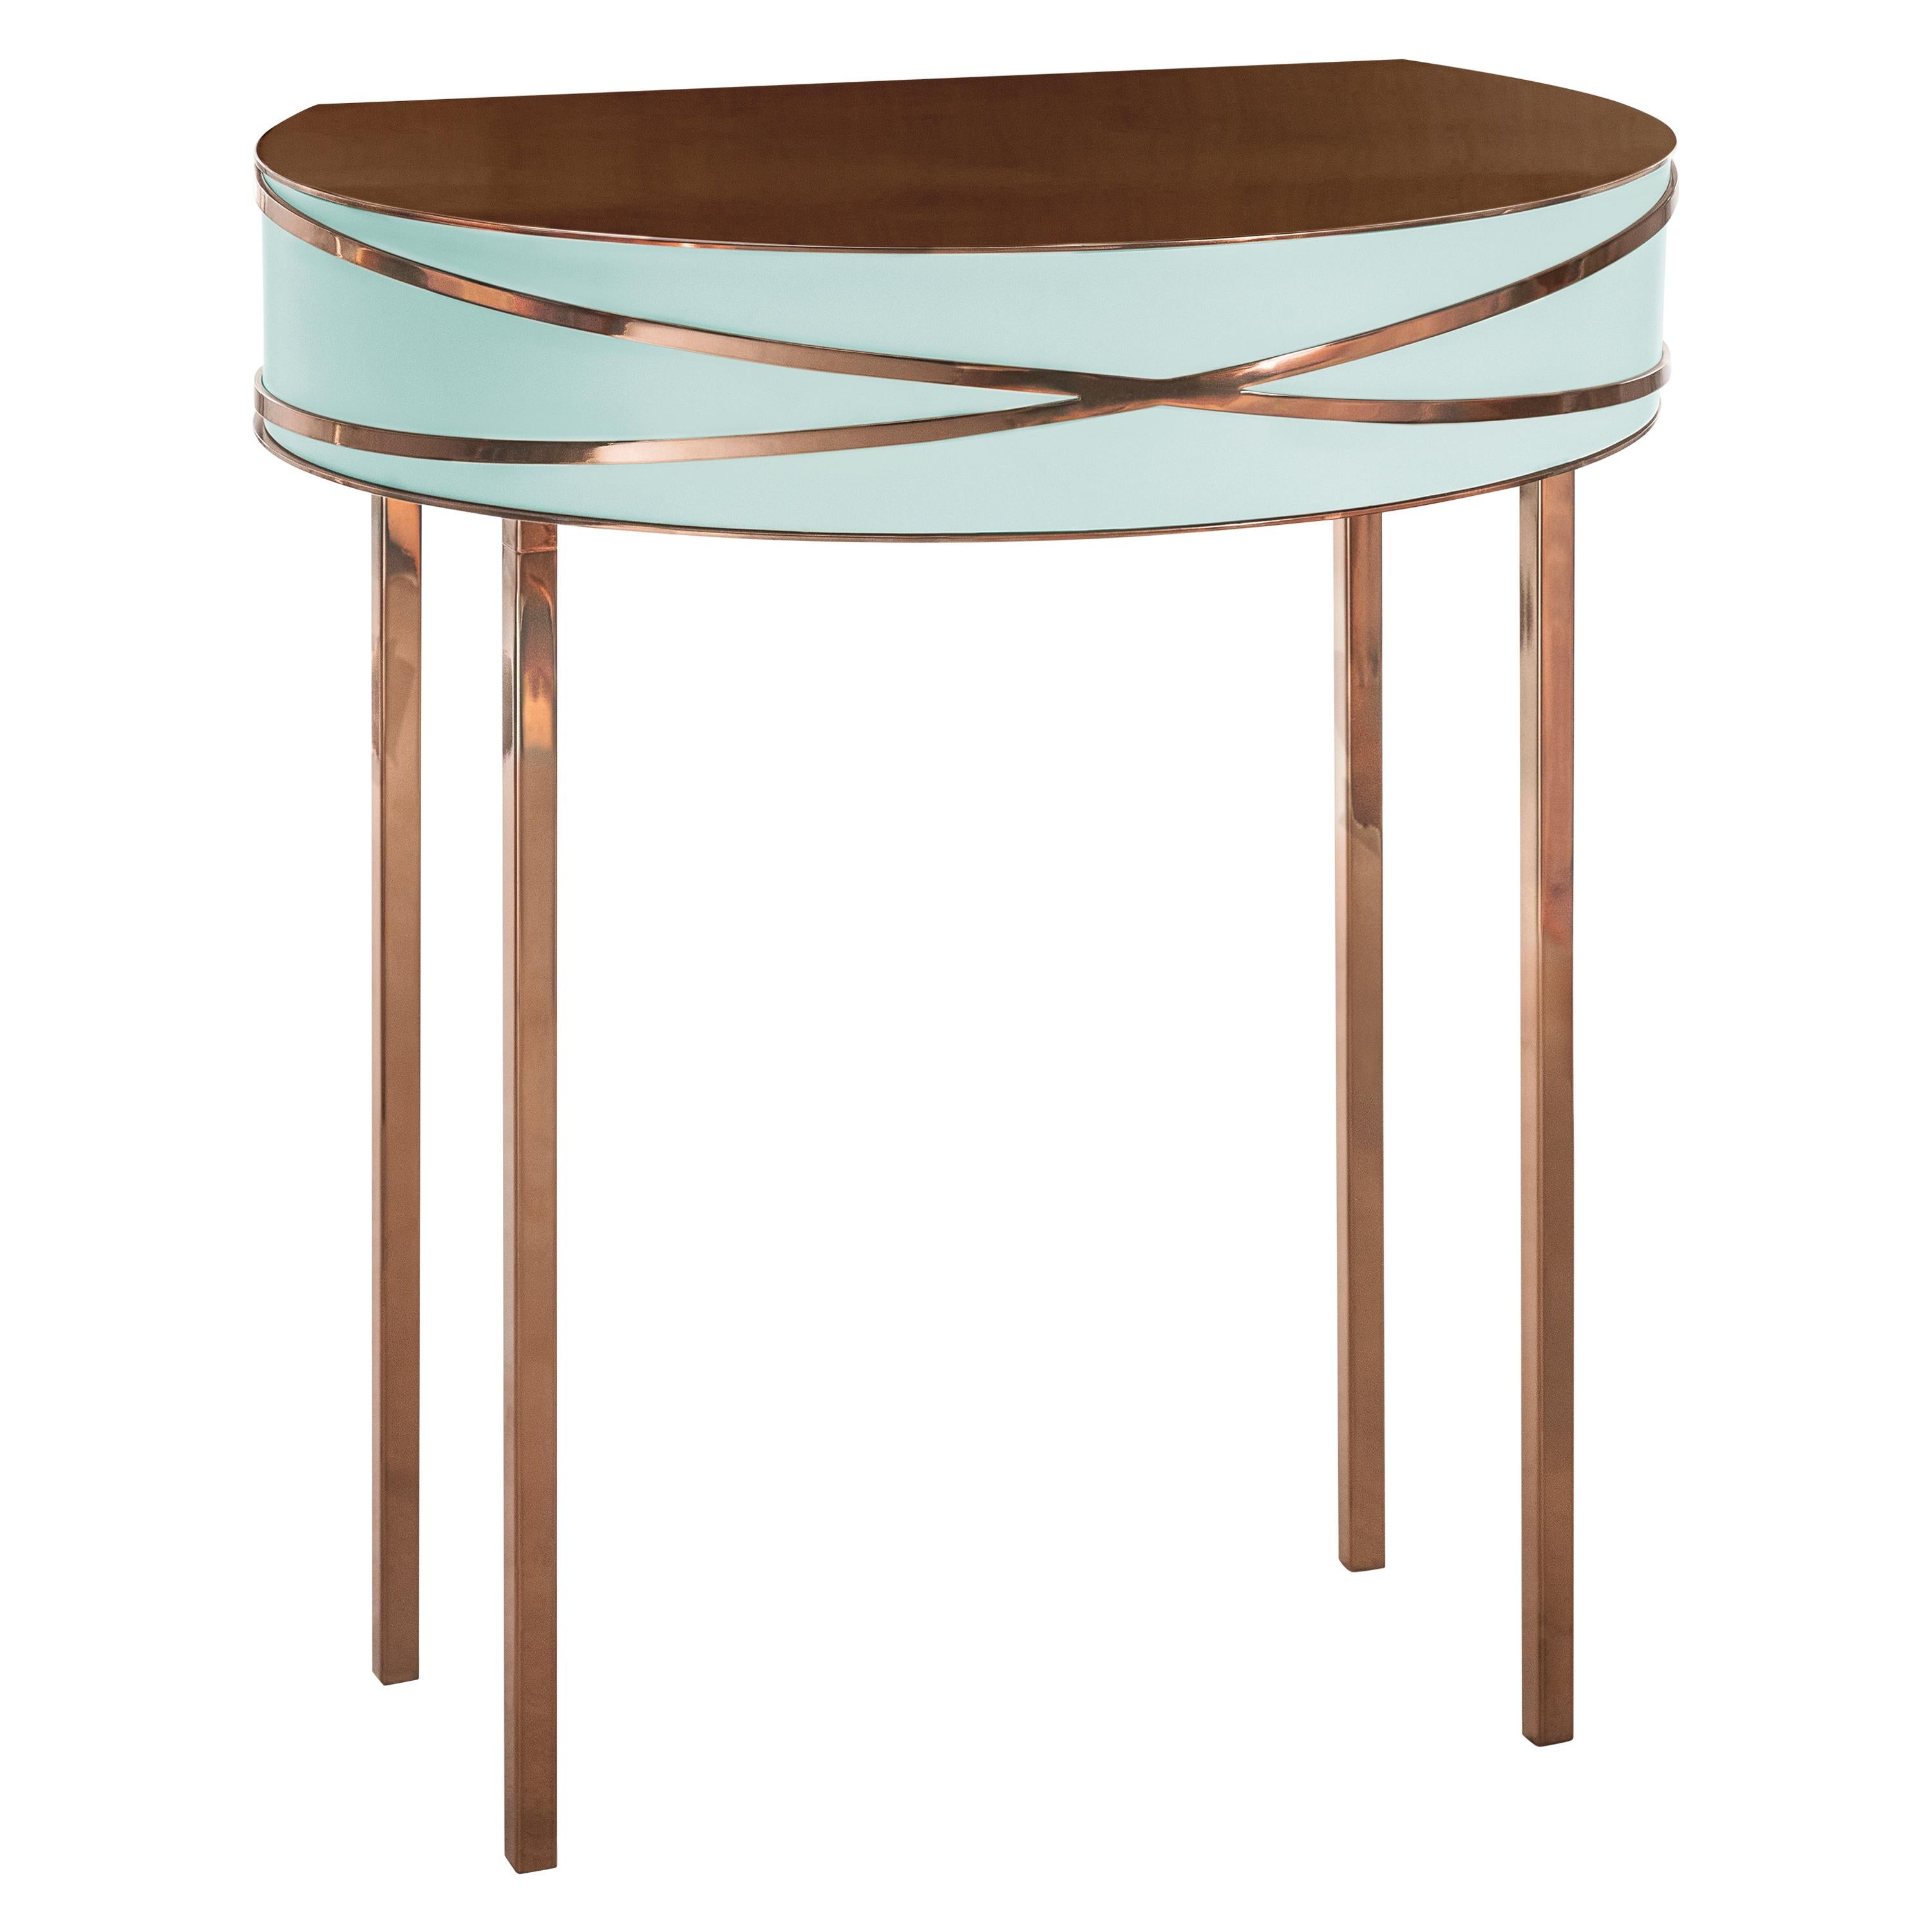 Stella Mint Green Console or Bedside Table with Rose Gold Trims by Nika Zupanc For Sale